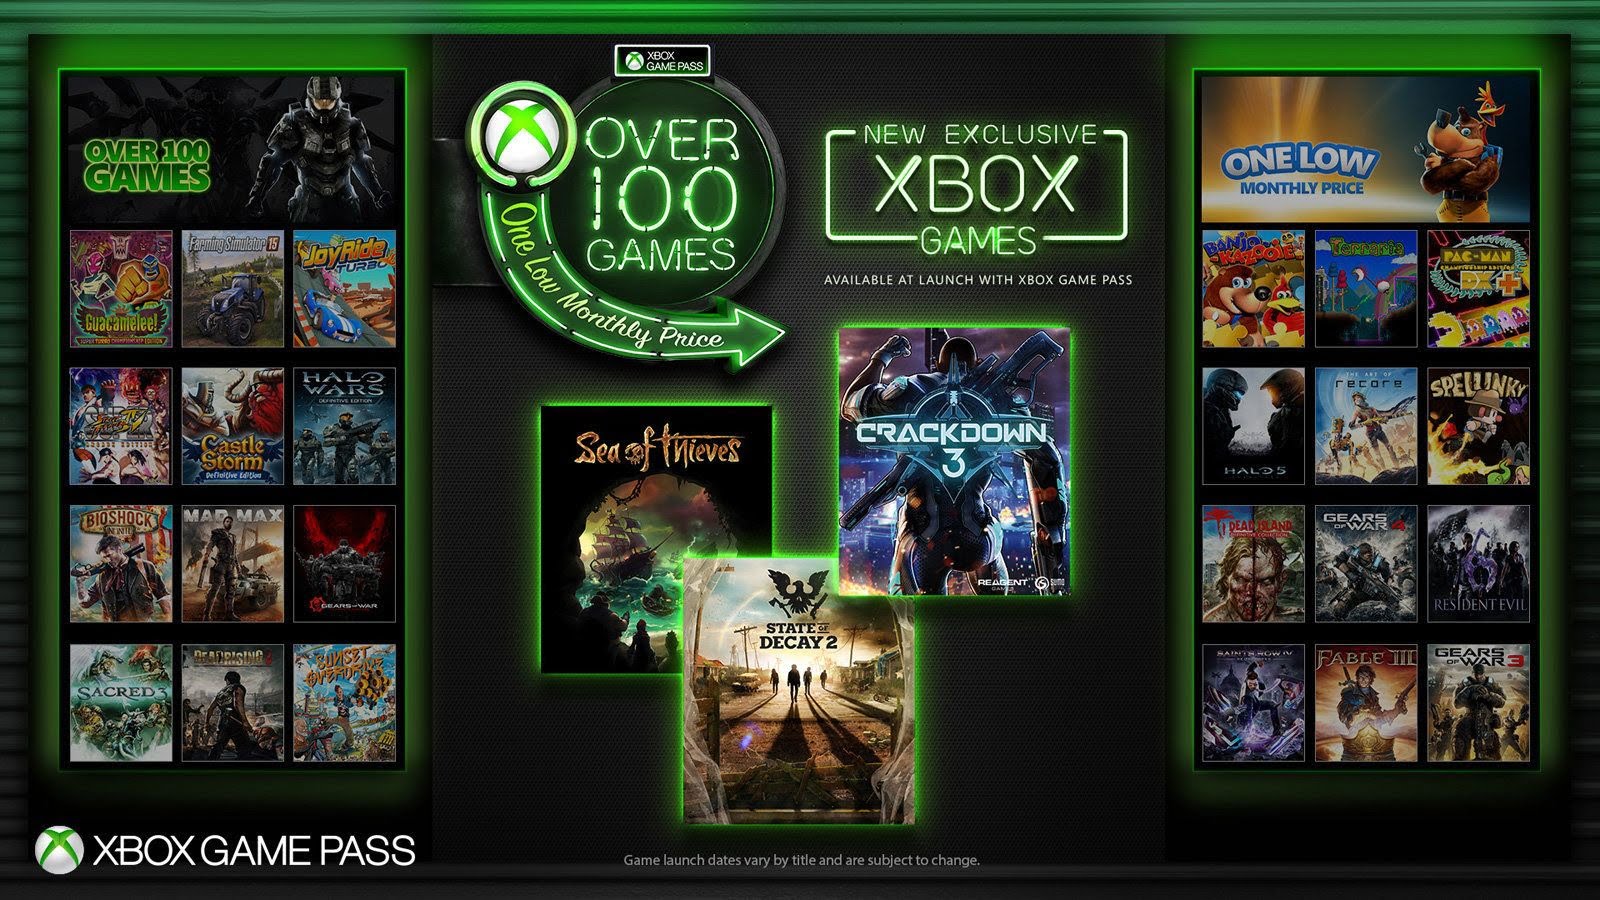 Xbox Game Pass Ultimate is coming to iOS in Spring 2021